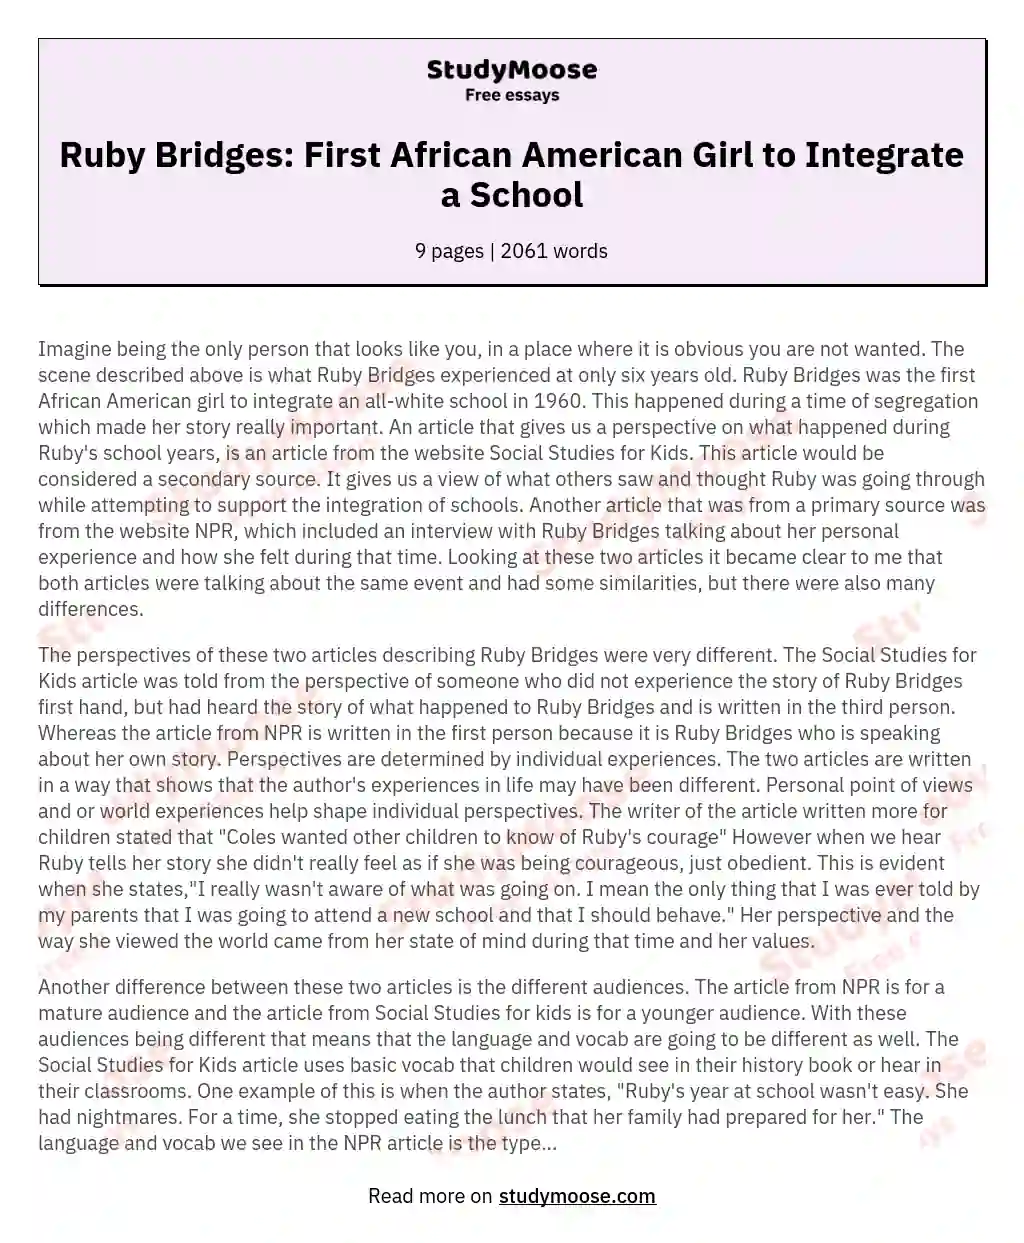 Ruby Bridges: First African American Girl to Integrate a School essay